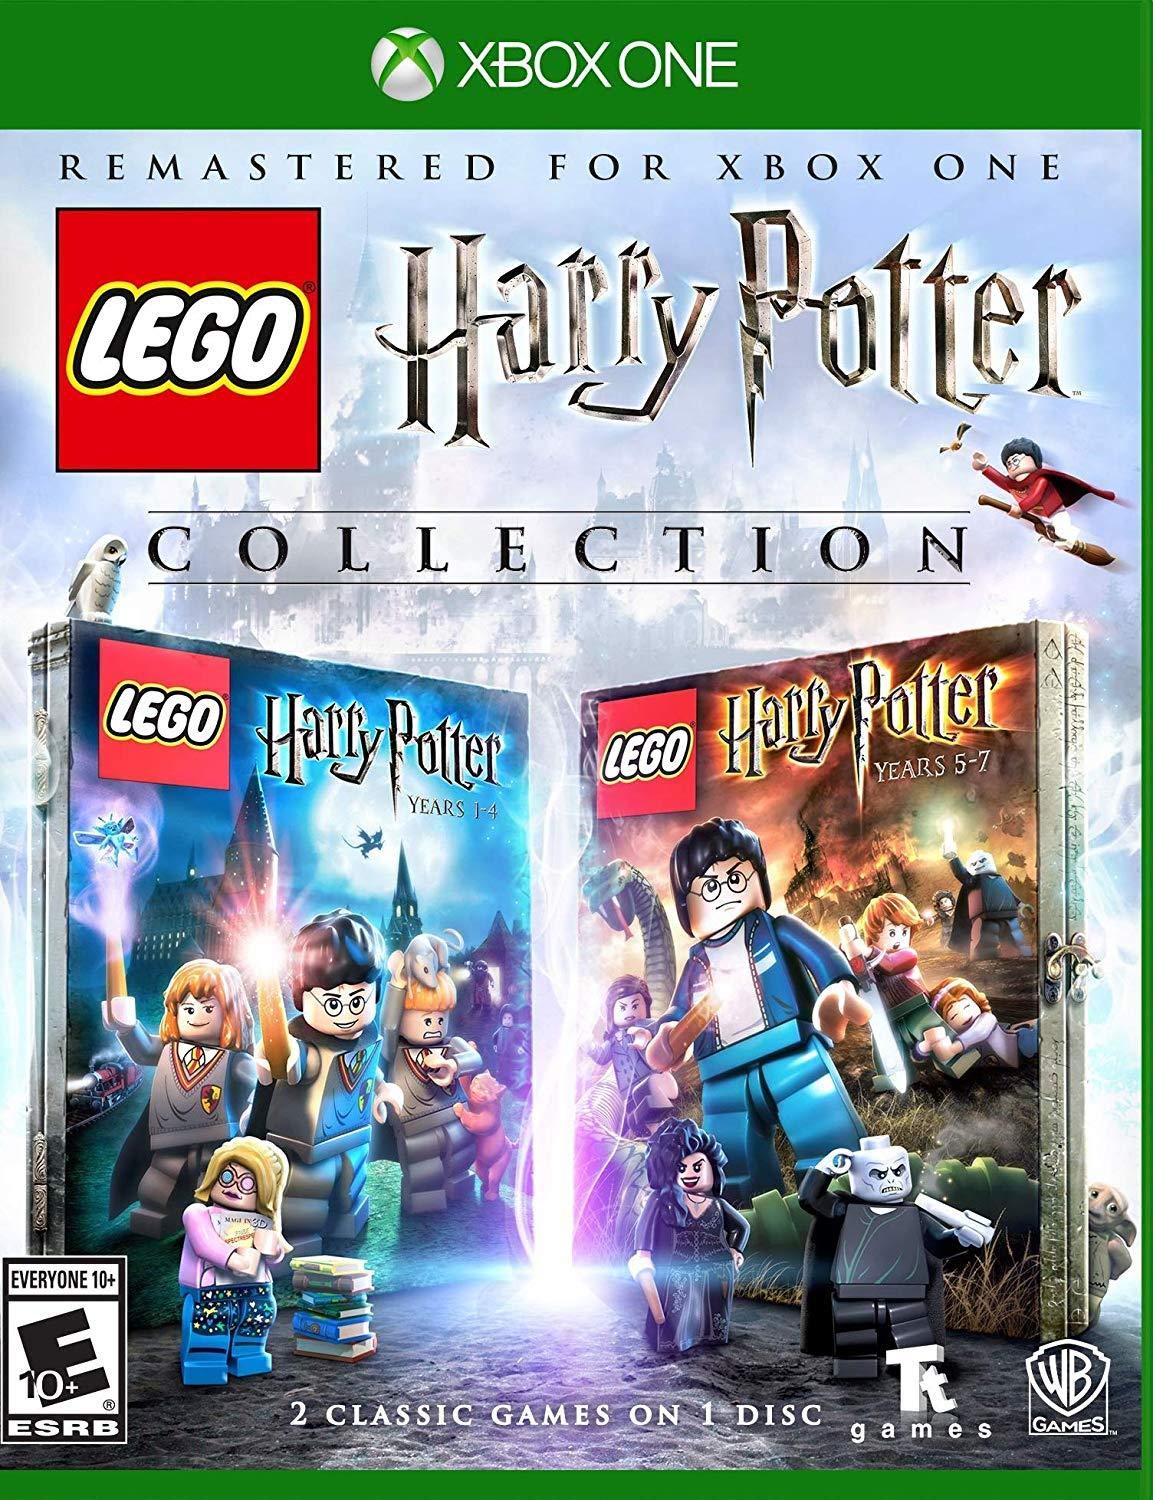 LEGO Harry Potter: Collection (Xbox One) $11 at Amazon